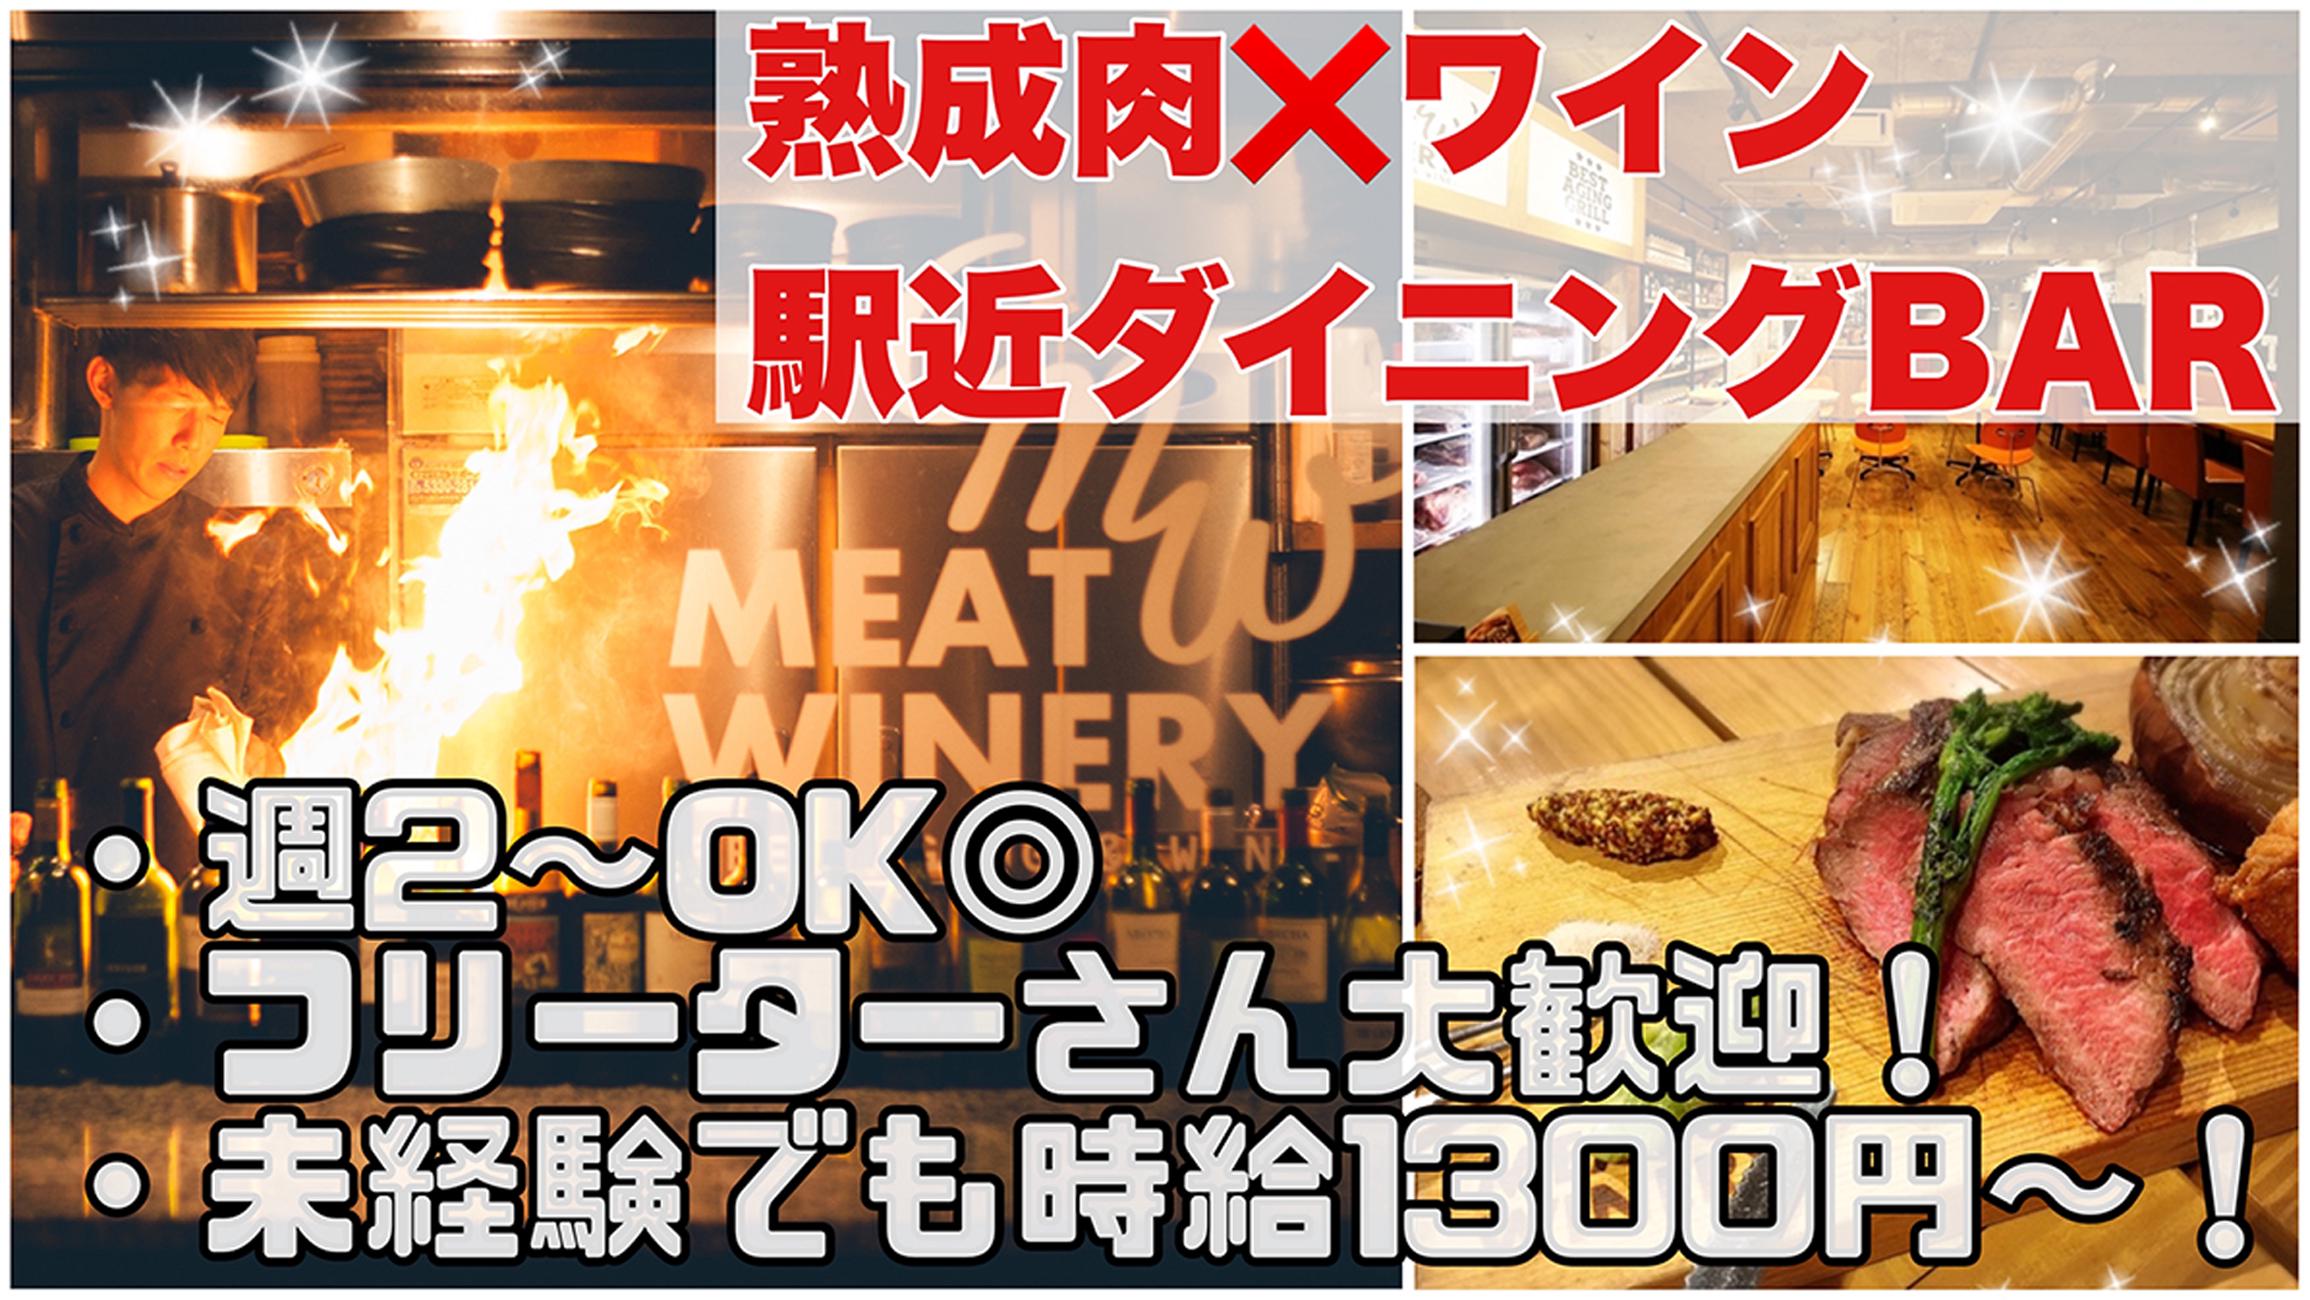 MeatWinery 秋葉原店の求人画像